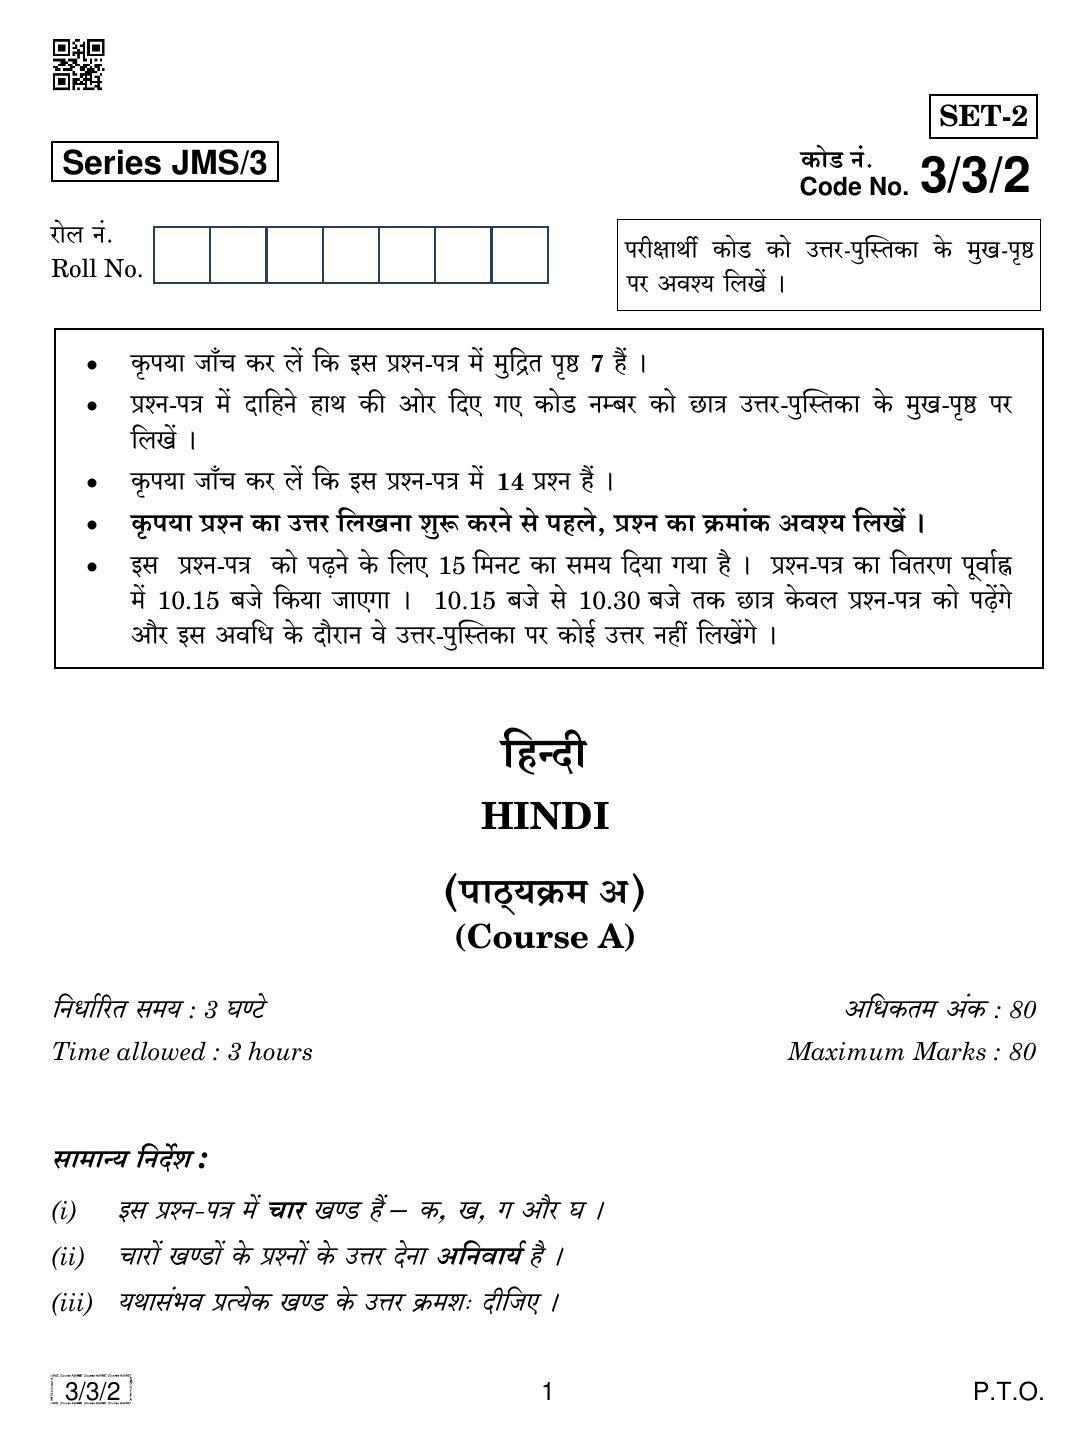 CBSE Class 10 3-3-2 HINDI COURSE- A 2019 Question Paper - Page 1